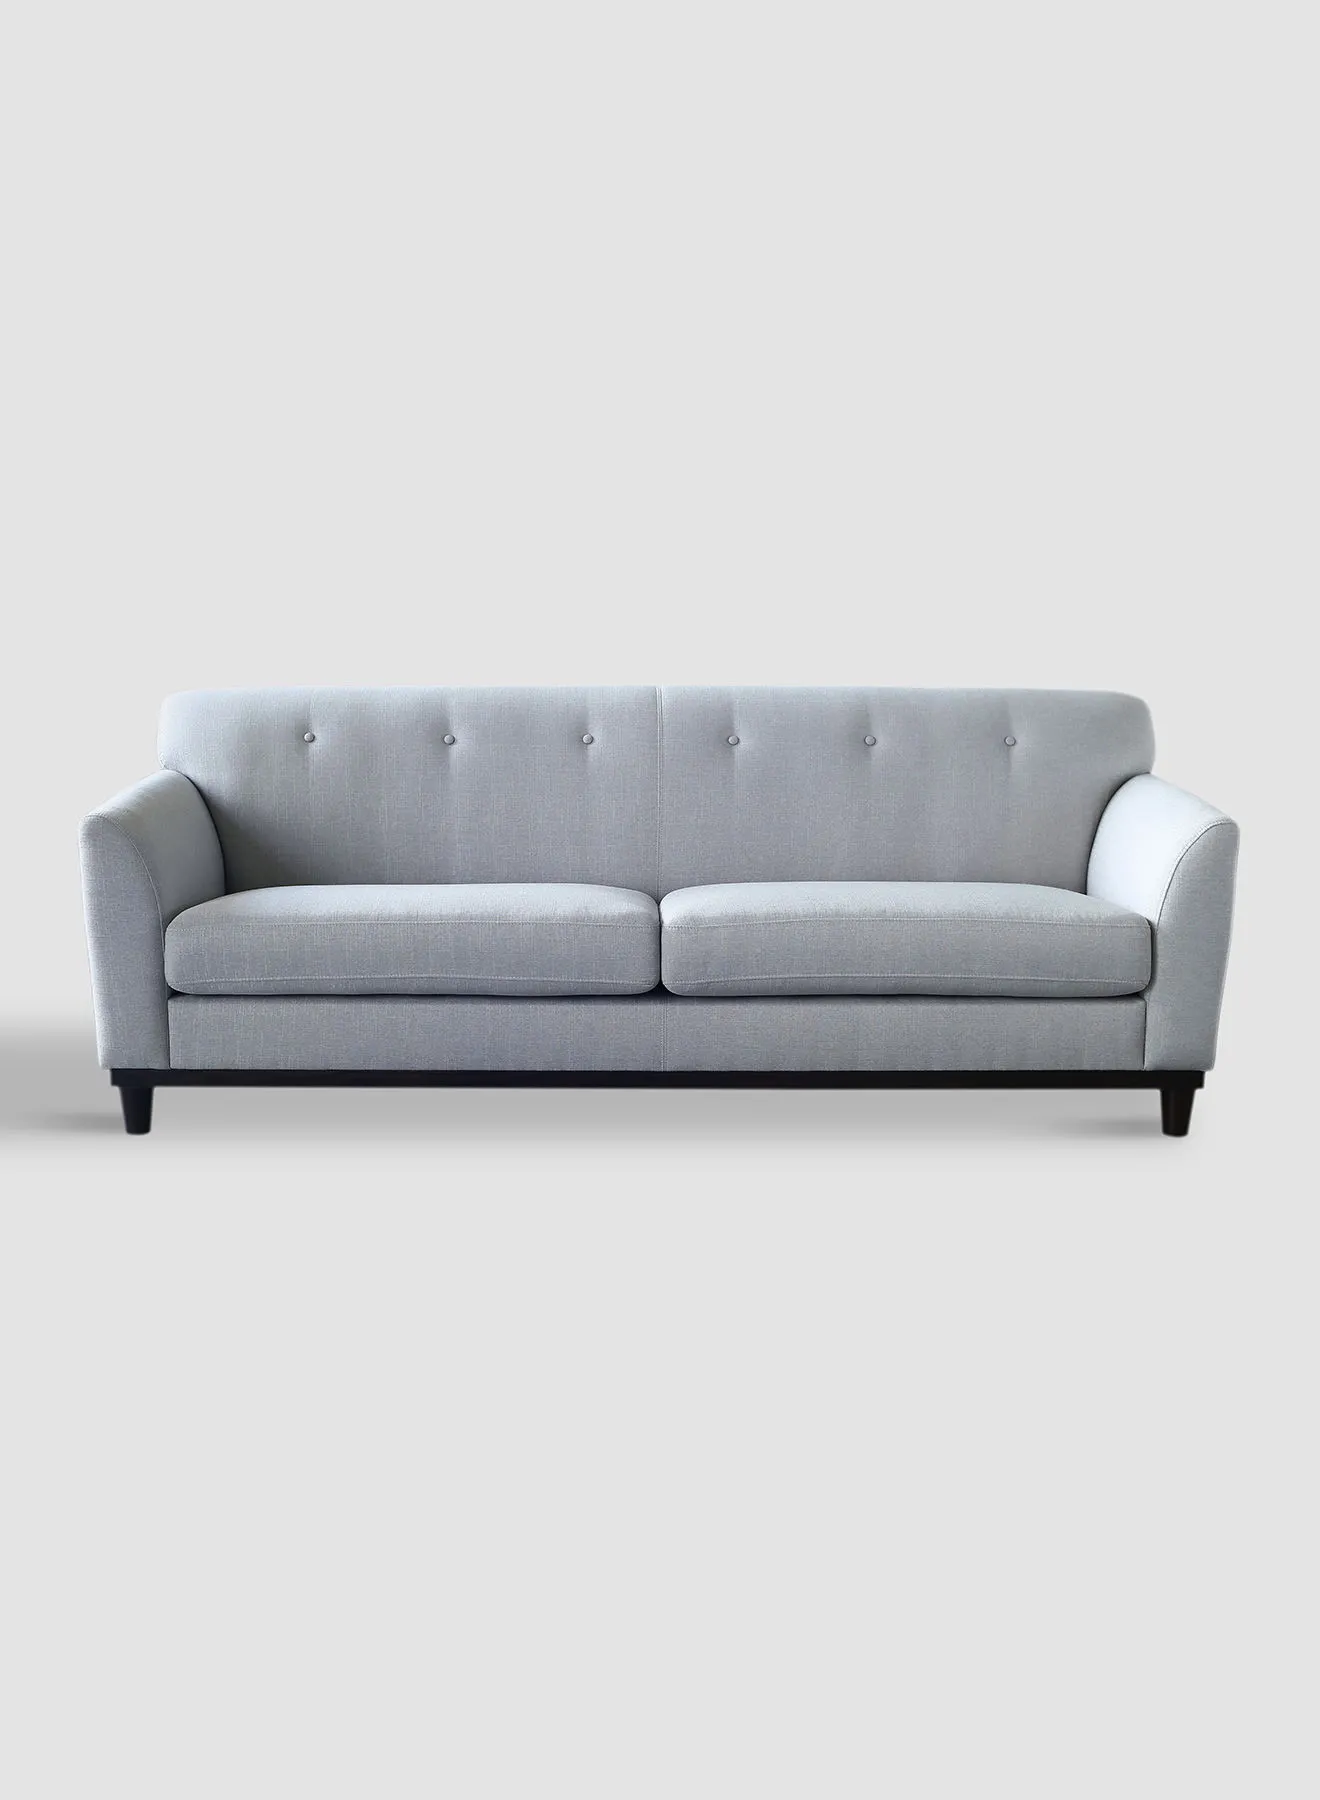 Switch Sofa - Upholstered Fabric Light Grey Wood Couch - 2180 X 940 X 790 - 3 Seater Sofa Relaxing Sofa